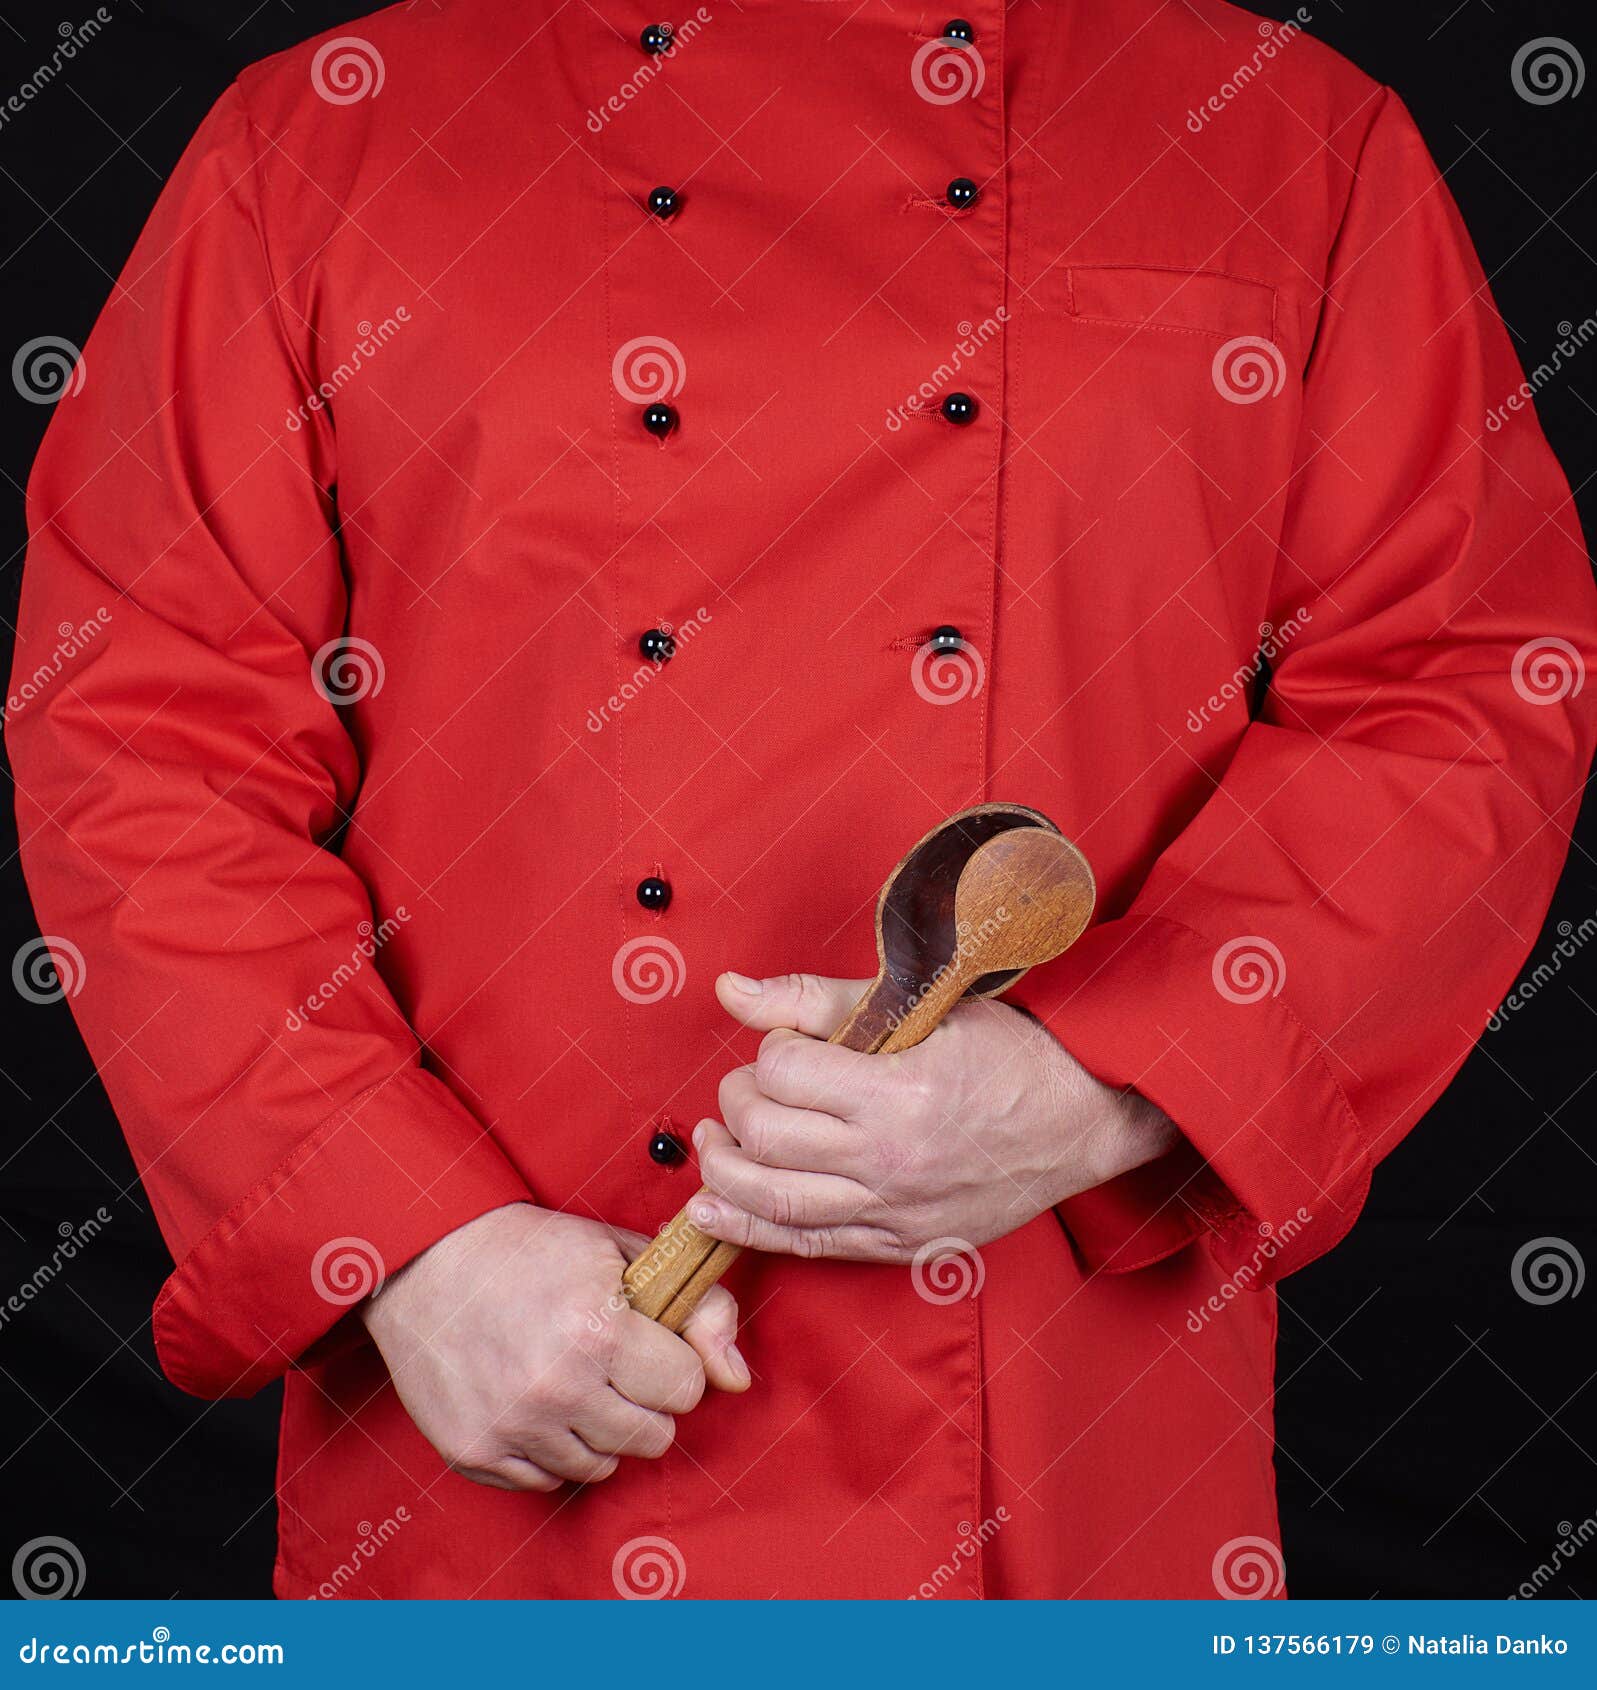 Chef in Red Uniform Holding Old Wooden Spoons Stock Image - Image of ...